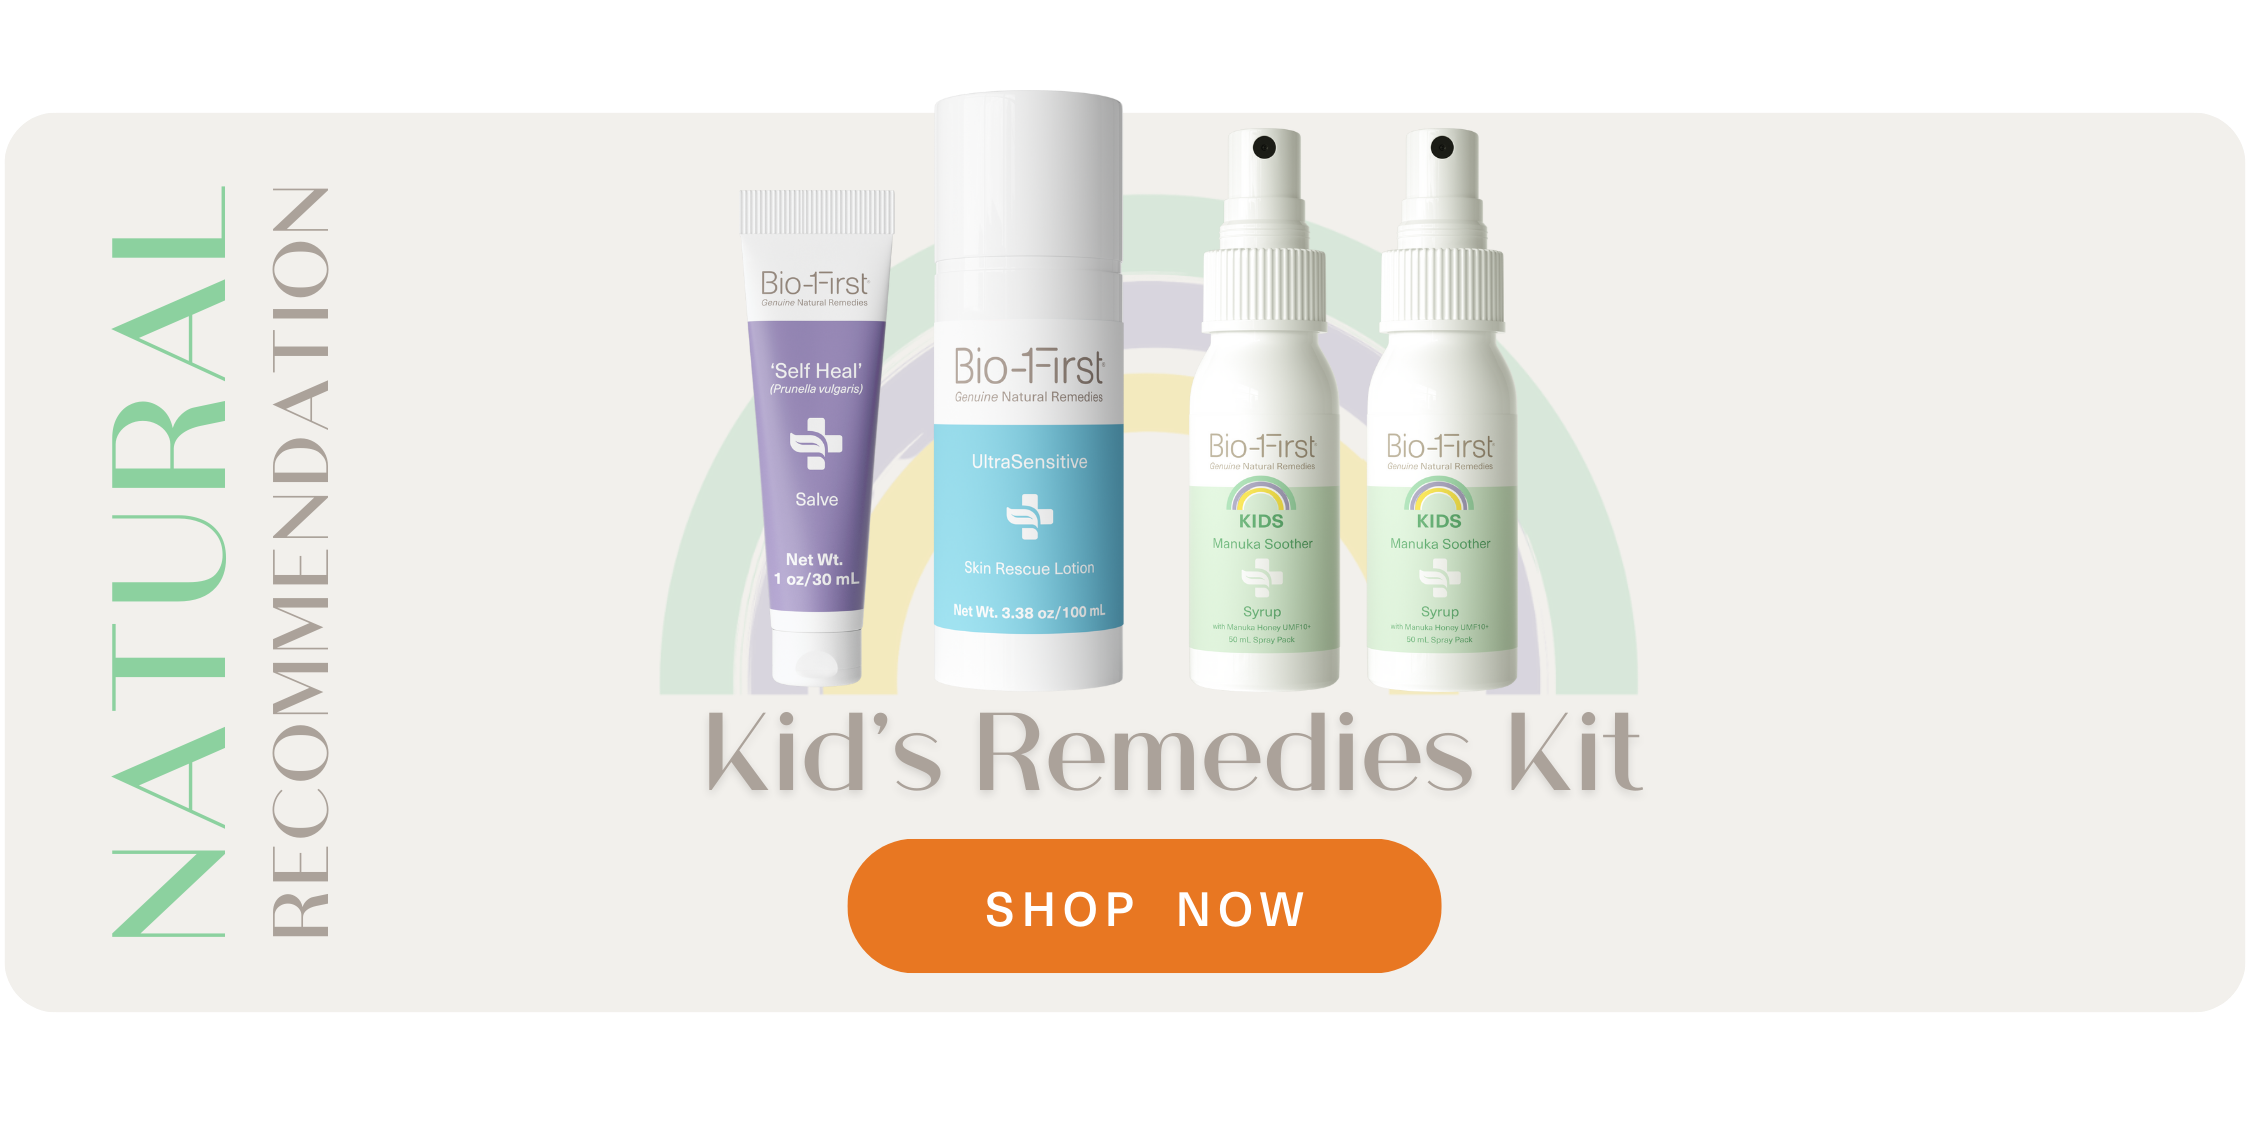 Kids Remedies Kit - The ultimate skin and wellness support kit for kids (2+) with powerful ingredients straight from nature's medicine cabinet.